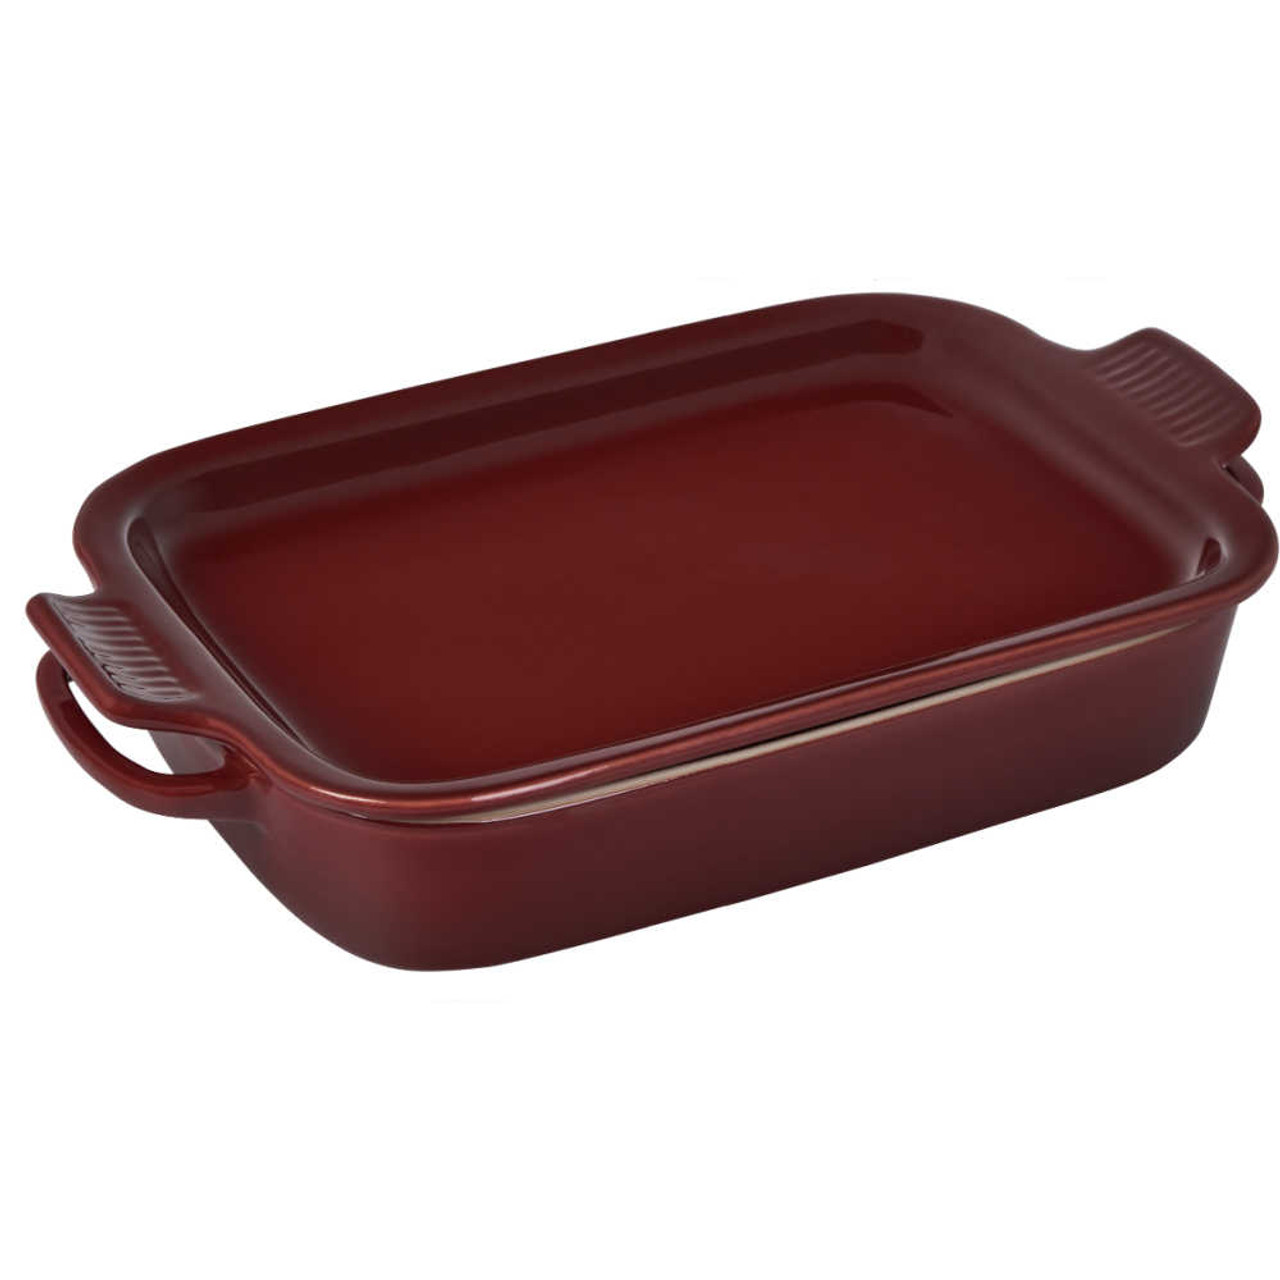 https://cdn11.bigcommerce.com/s-hccytny0od/images/stencil/1280x1280/products/5565/24317/Le_Creuset_Rectangular_Dish_With_Platter_Lid_in_Rhone_1__96563.1691011039.jpg?c=2?imbypass=on